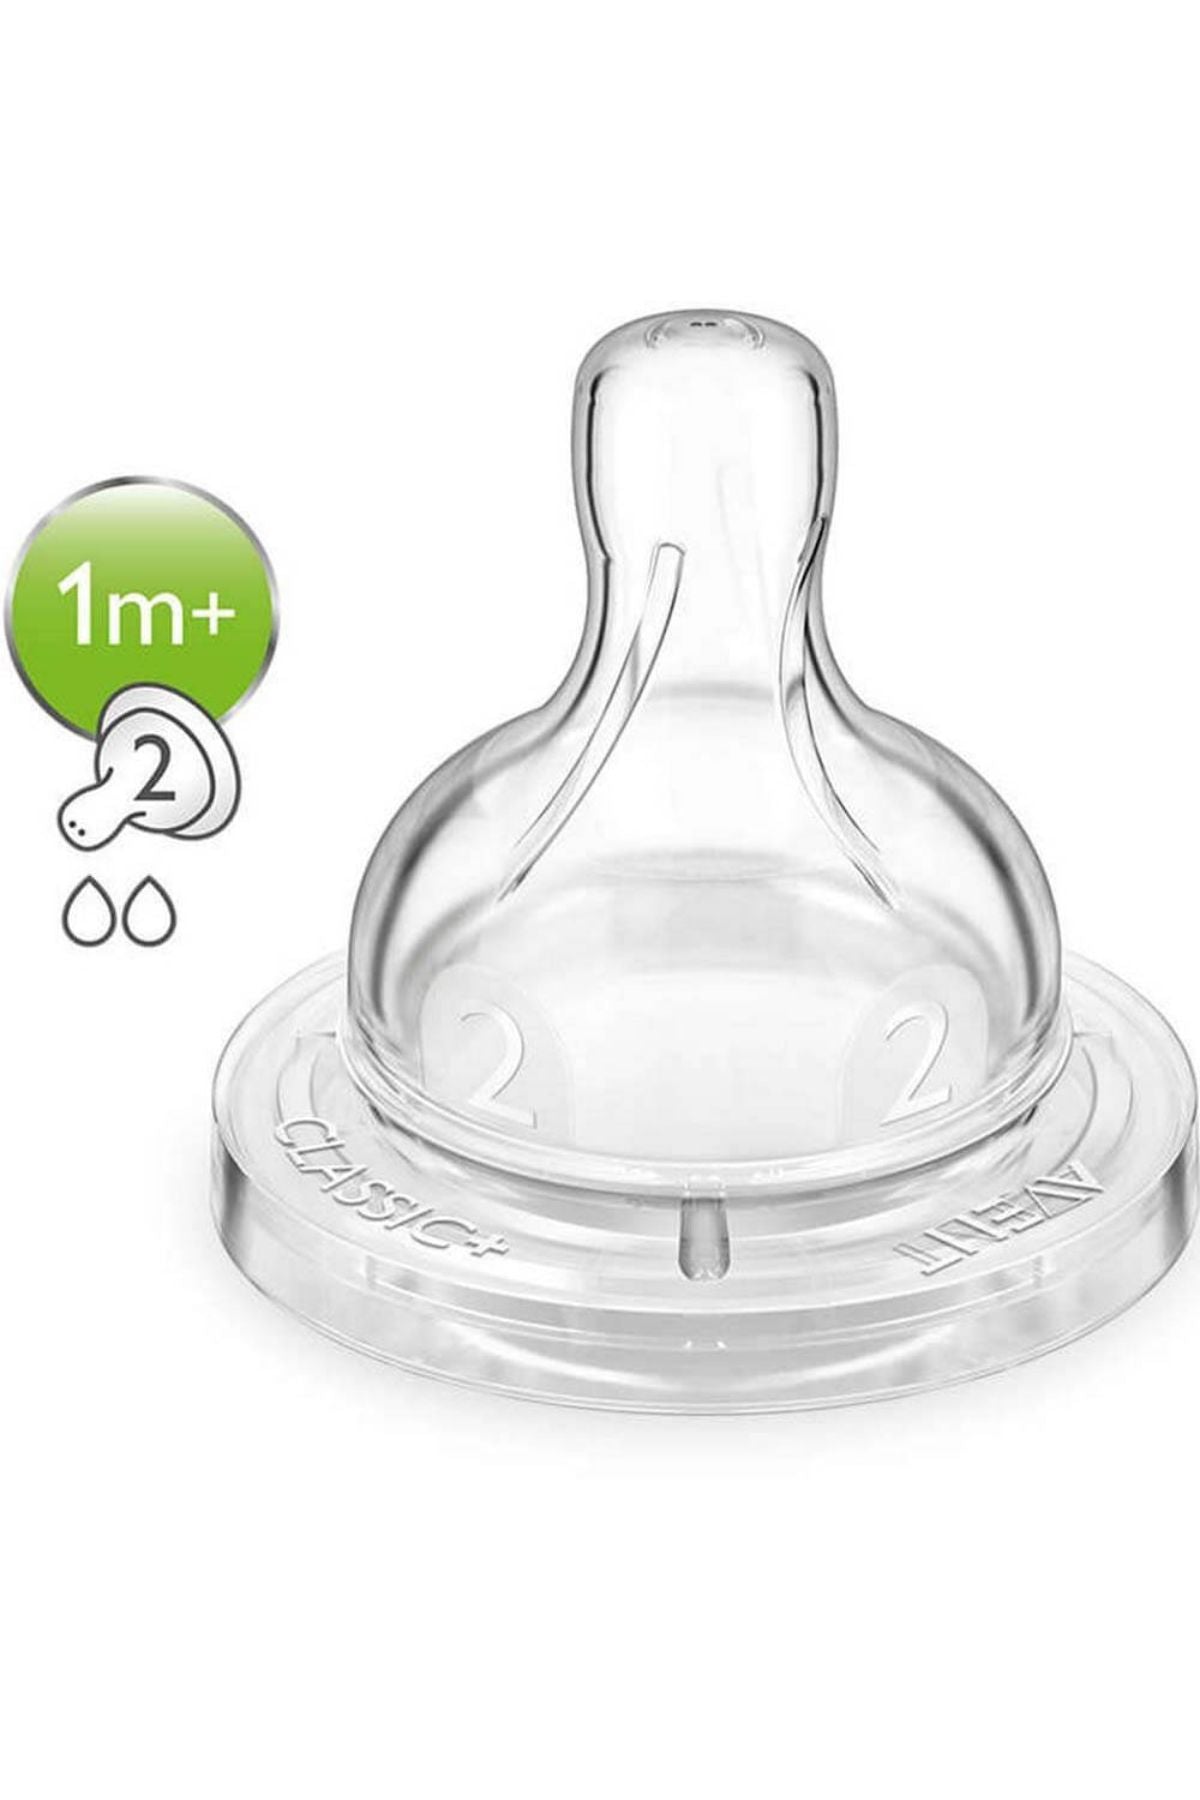 philips avent - silicone teat  1m+ / 2h pk2 - philips avent - silicone teat  1m+ / 2h pk2 - Cotton Candy™ Pakistan